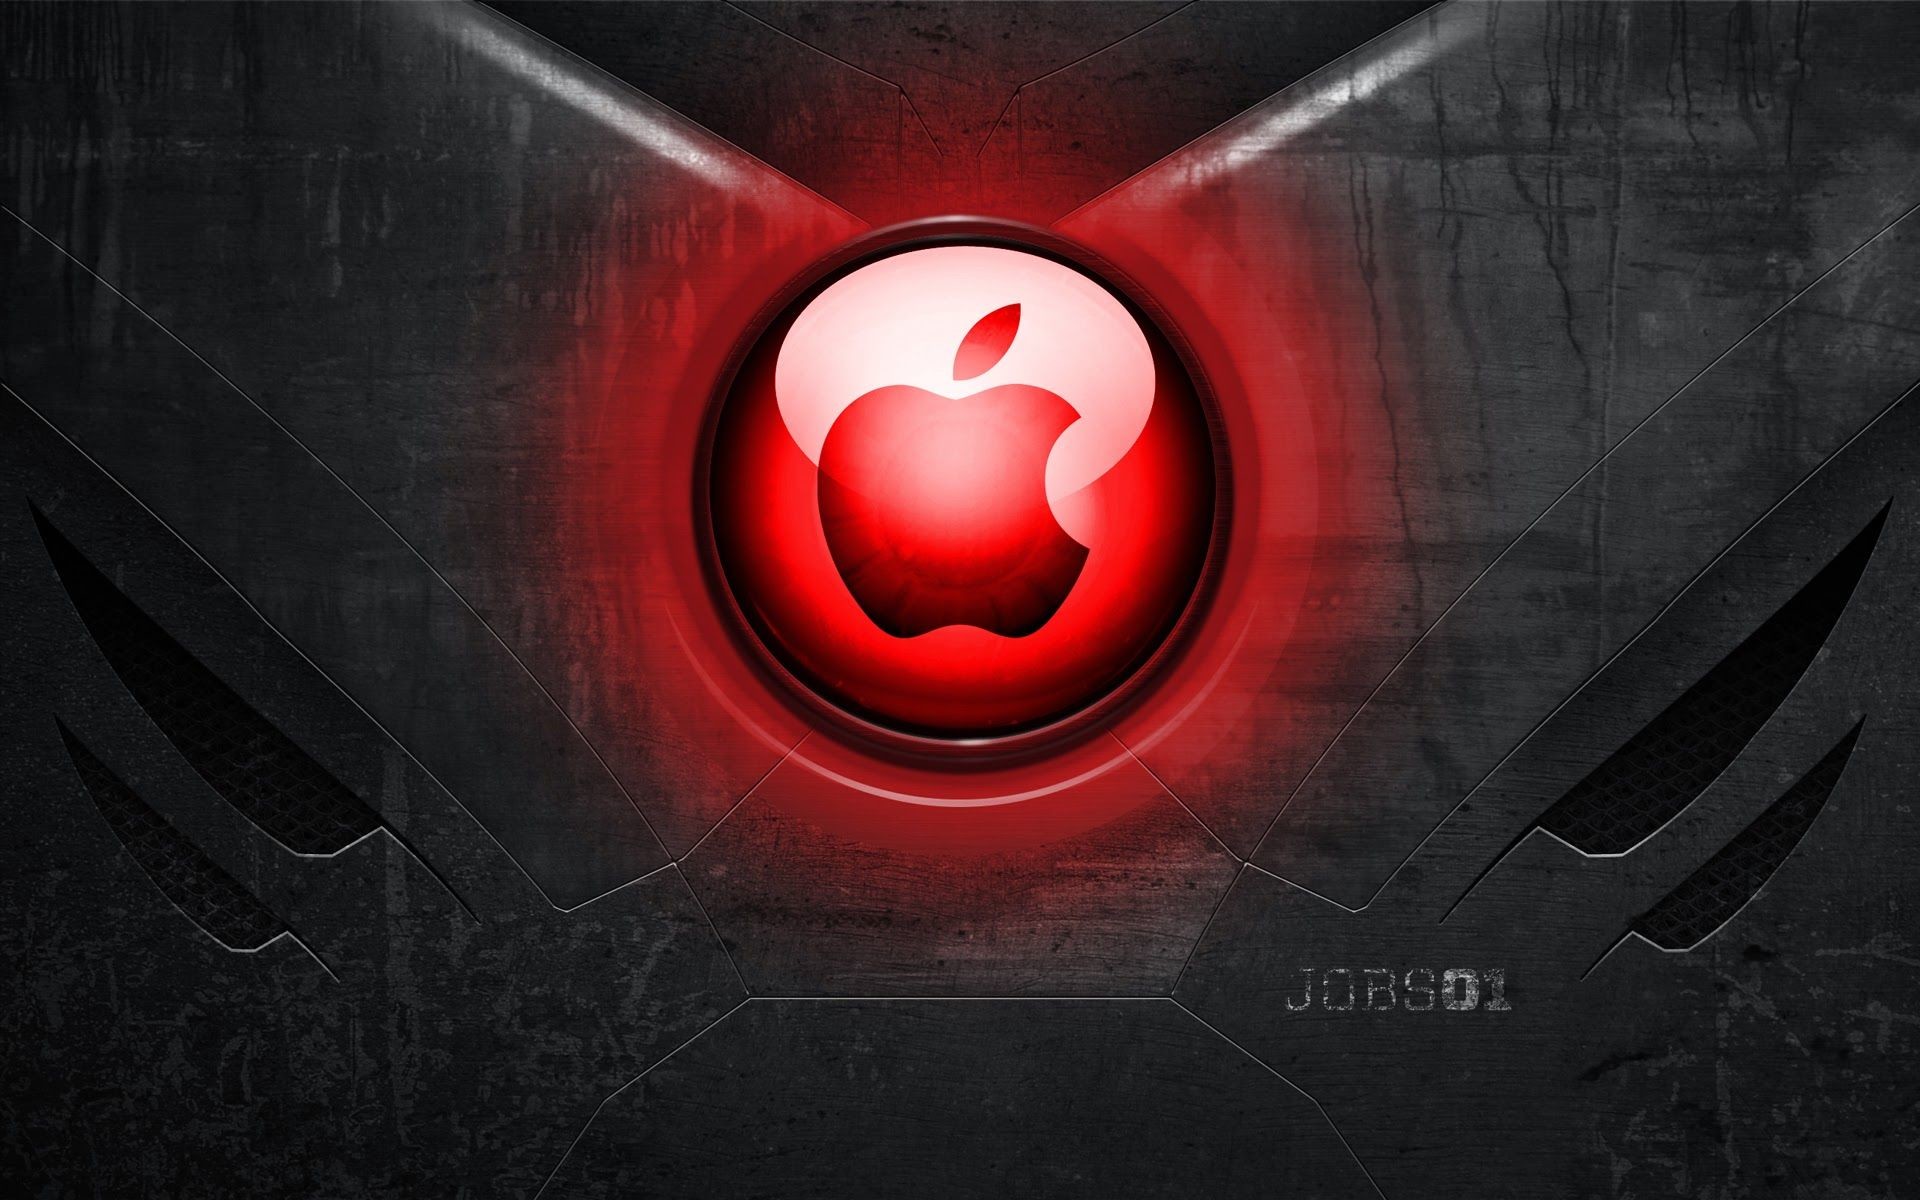 Red Apple Logo Image Full Hd Wallpaper Data Src Apple - Apple Logo Hd With  Red Background - 1920x1200 Wallpaper 